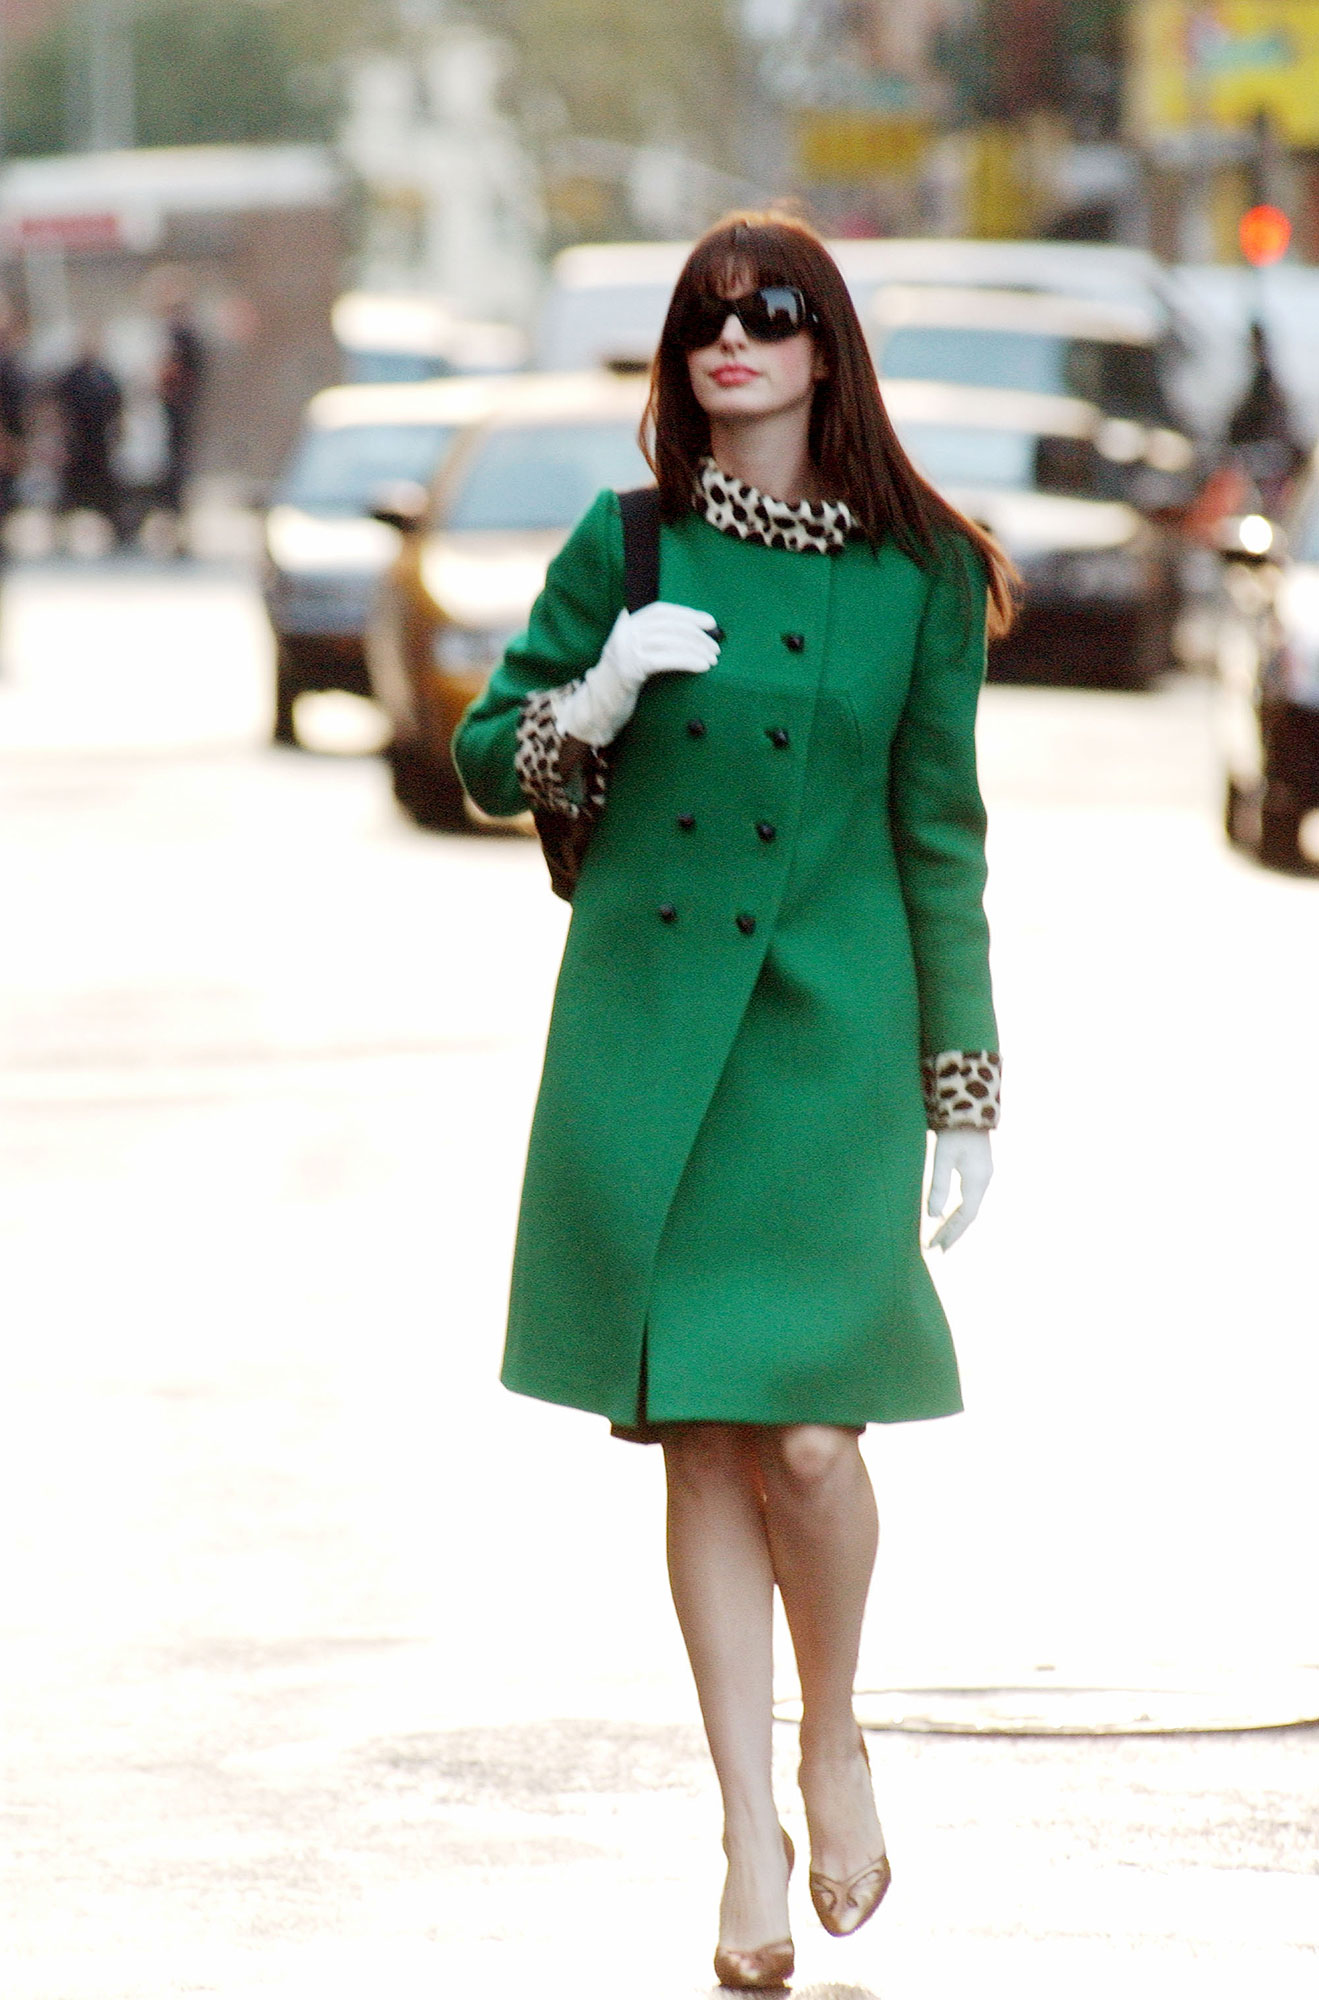 The Devil Wears Prada' Style: 10 Outfits We'd Still Wear Today